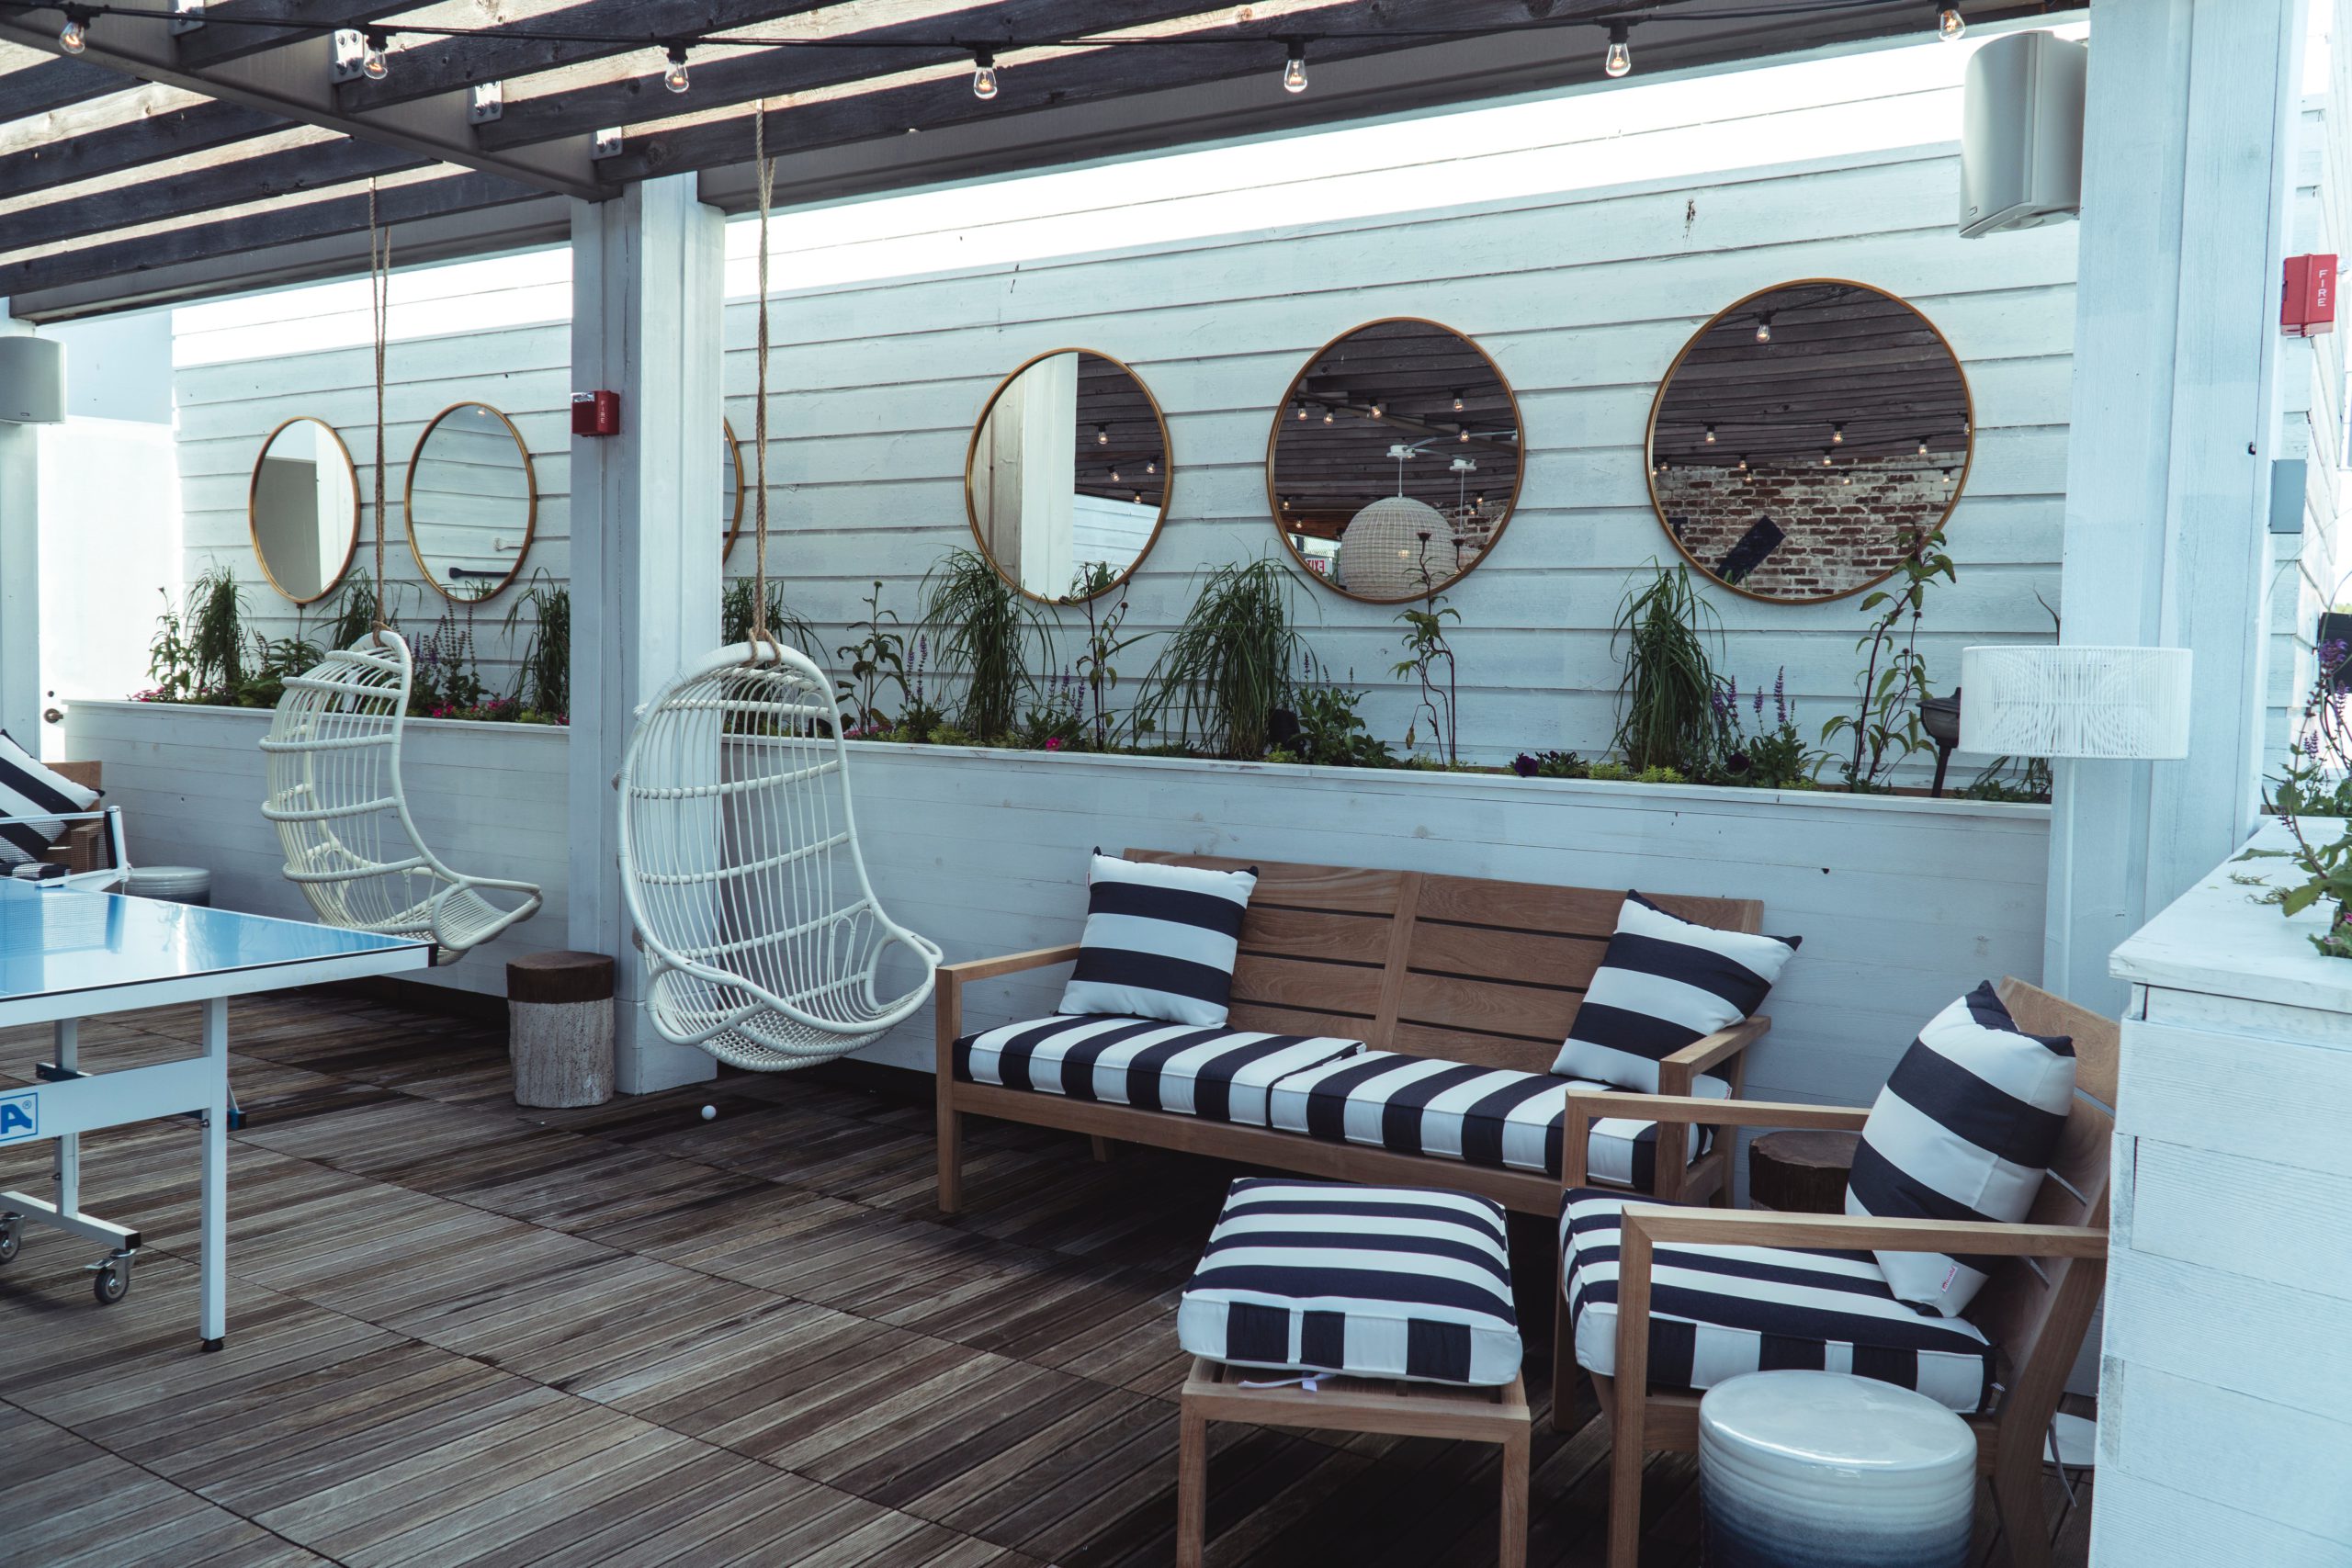 Outdoor space with striped cushions and egg swinging chairs set up in corner